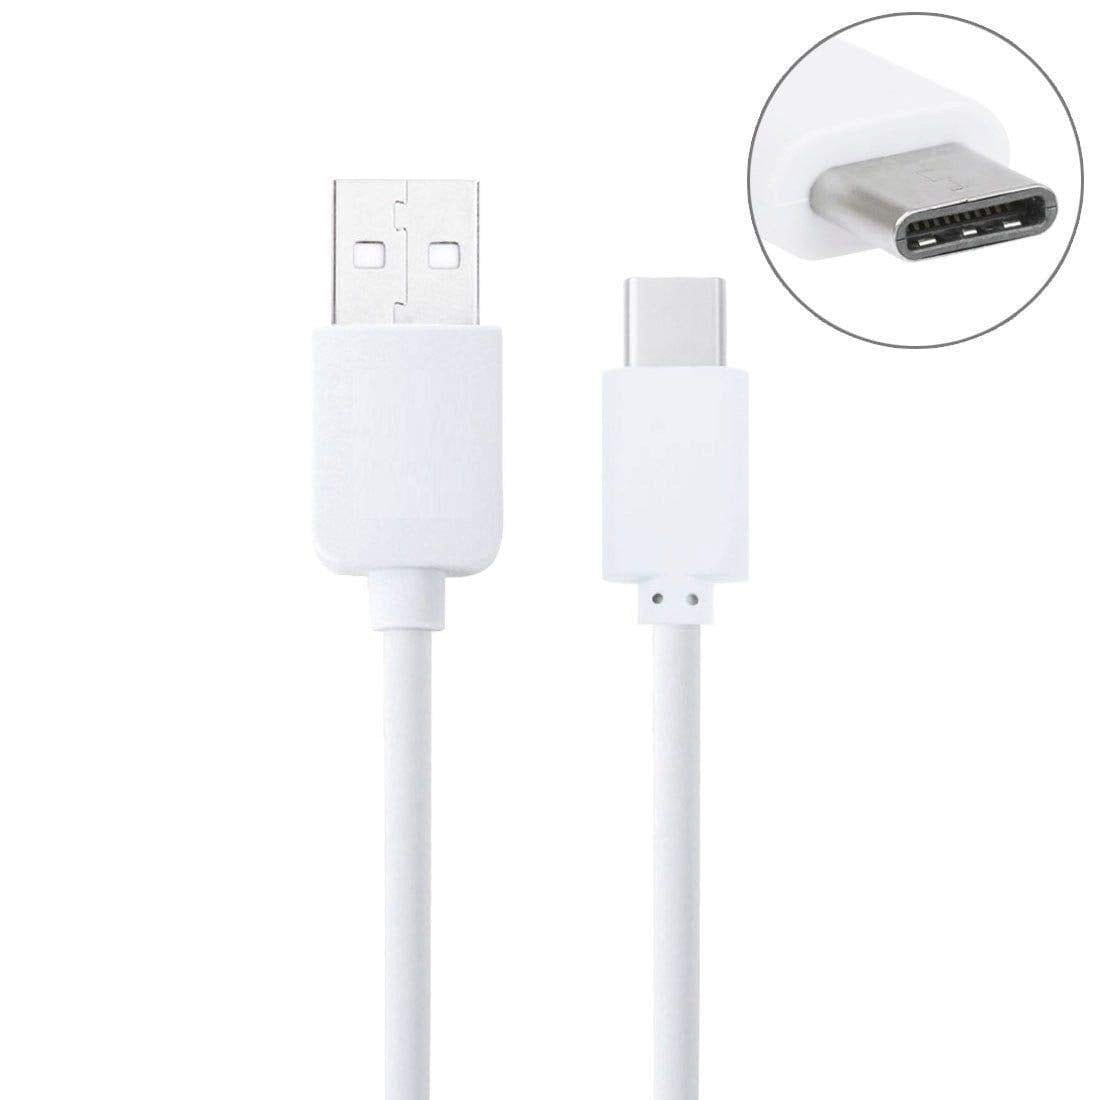 Samsung Galaxy S20 USB to Type C Charging Cable In Car White - 50 CM Short - SmartPhoneGadgetUK